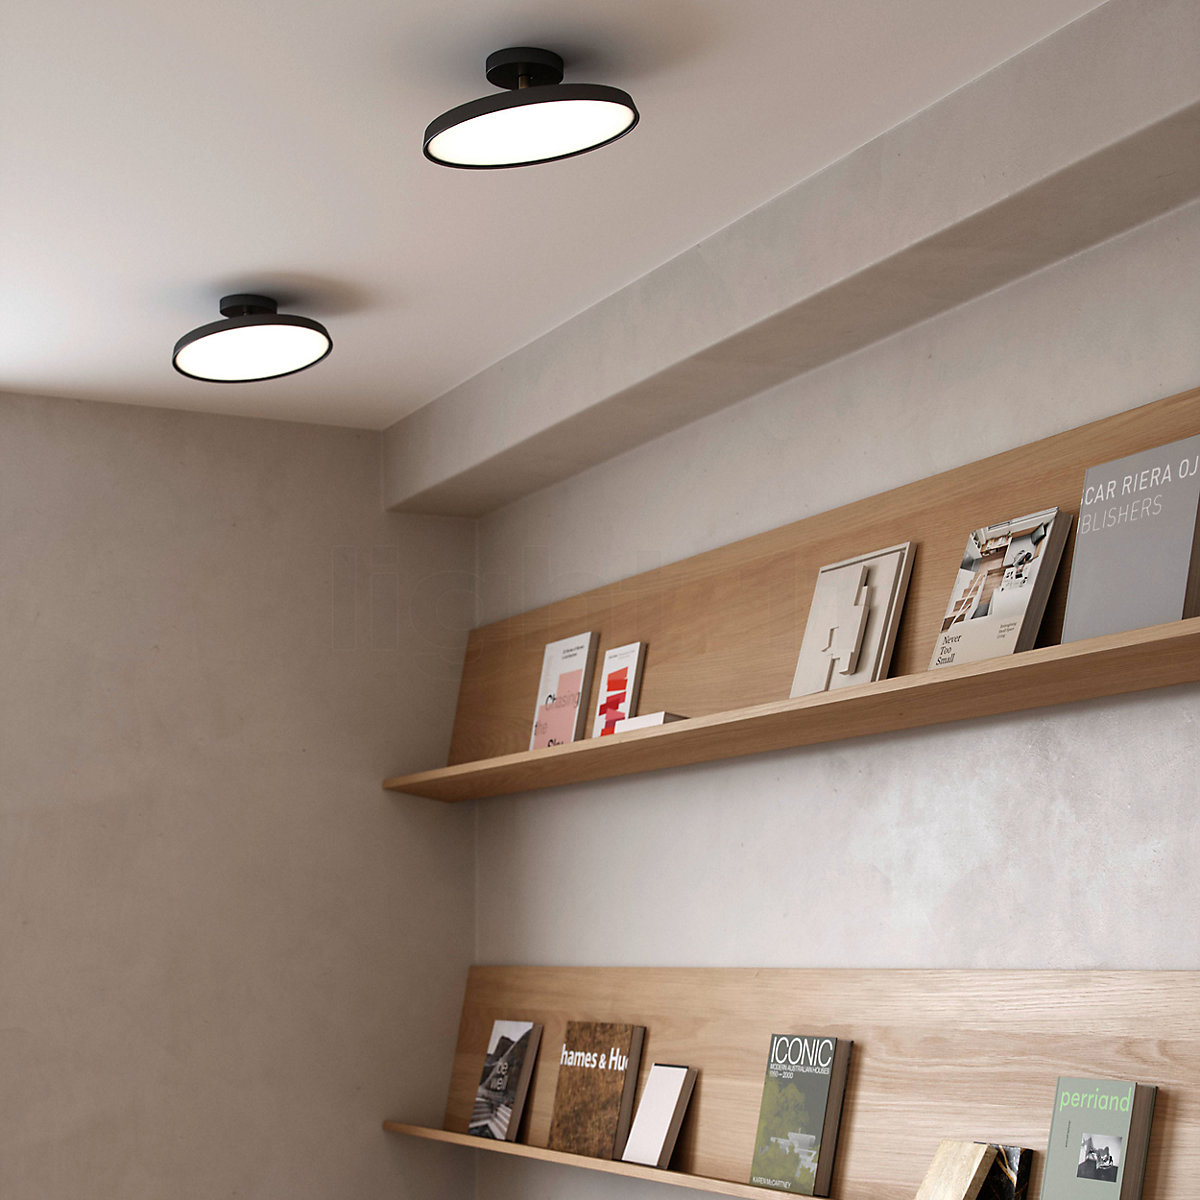 People Buy Pro Light Kaito Design for Ceiling at LED the